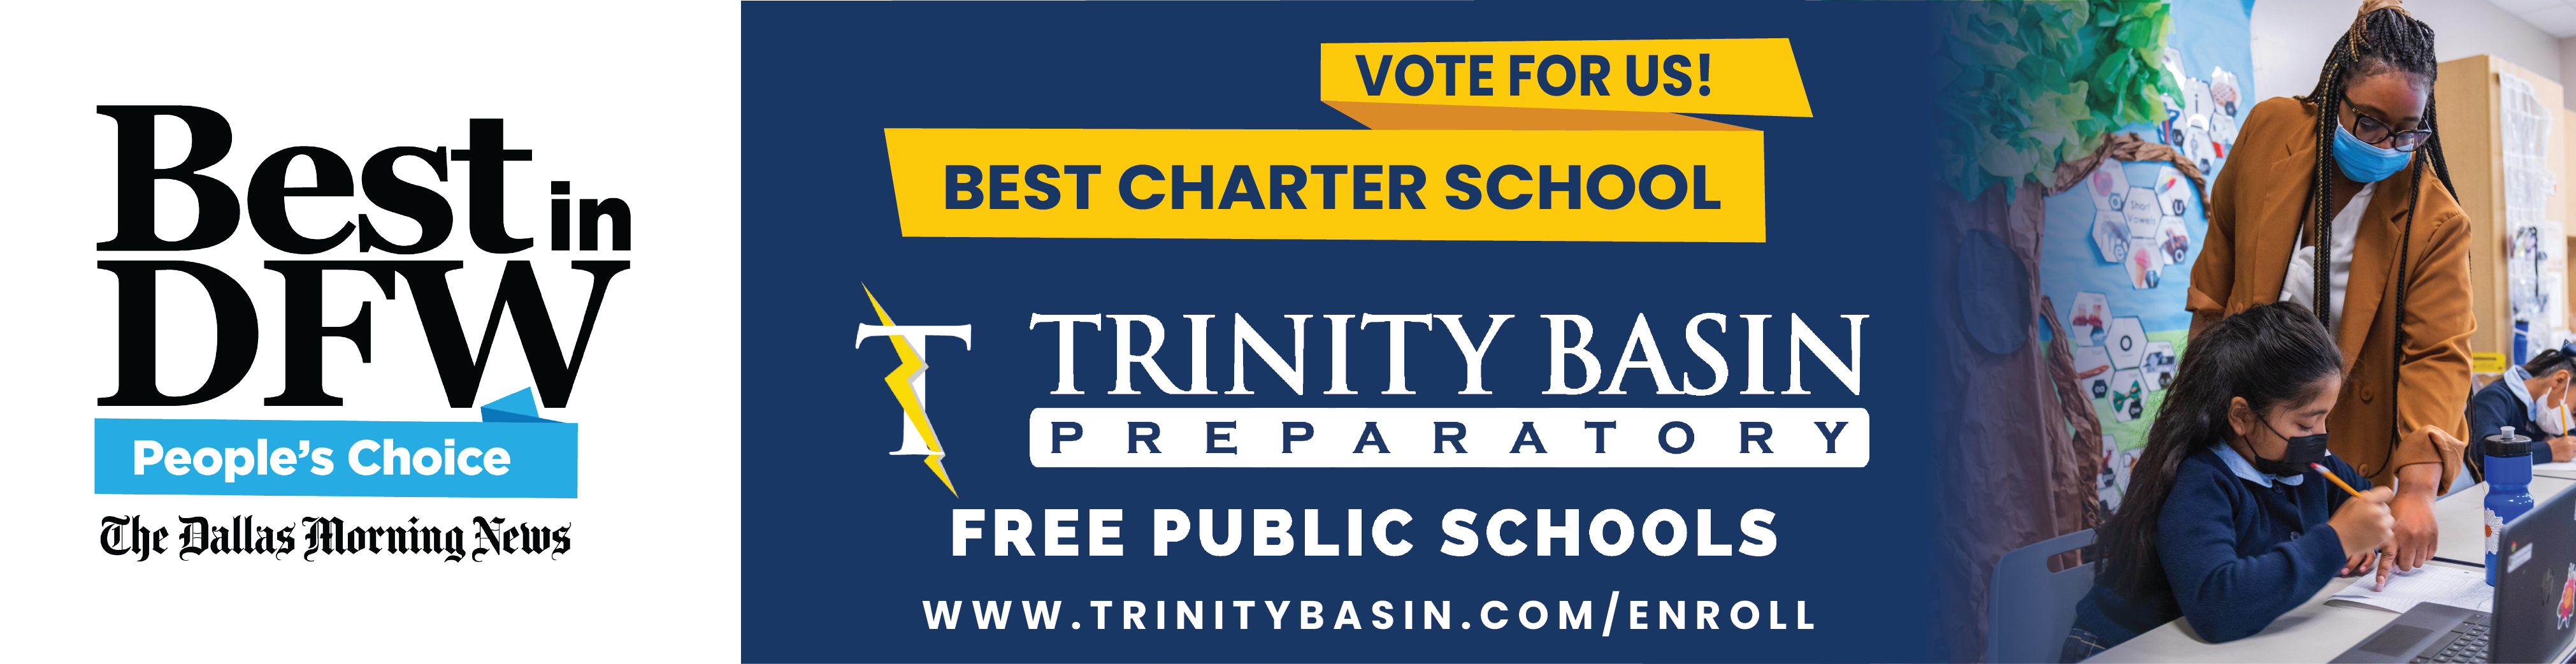 Vote For Us! Dallas Morning News Best Charter School!